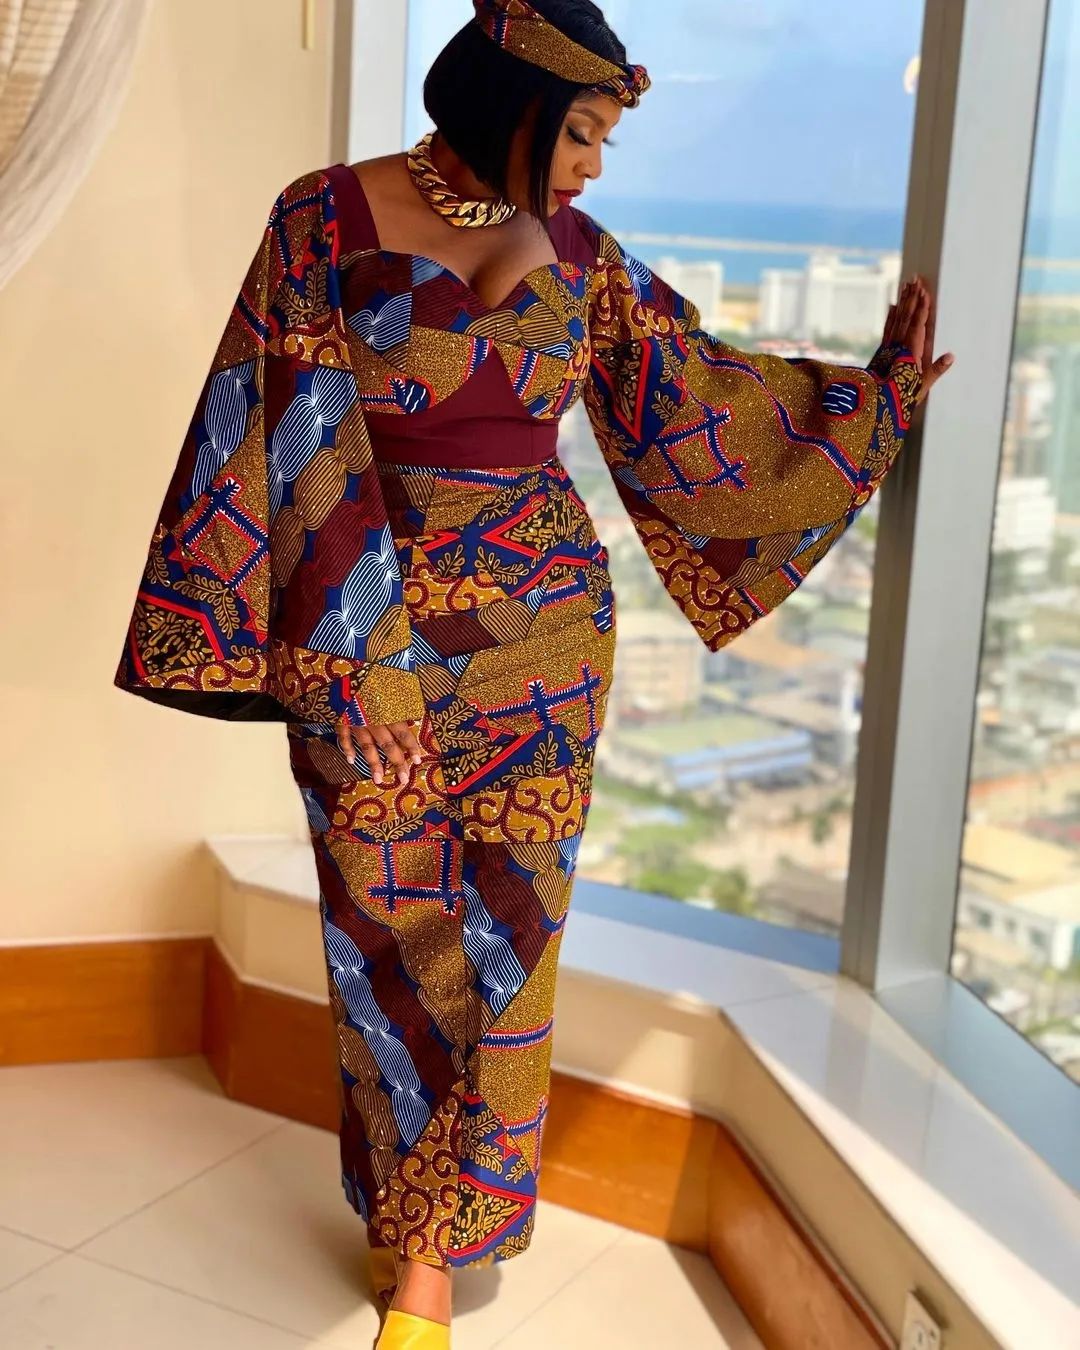 Wearing Your Legacy: The Imagery Behind Kitenge Dresses 2024